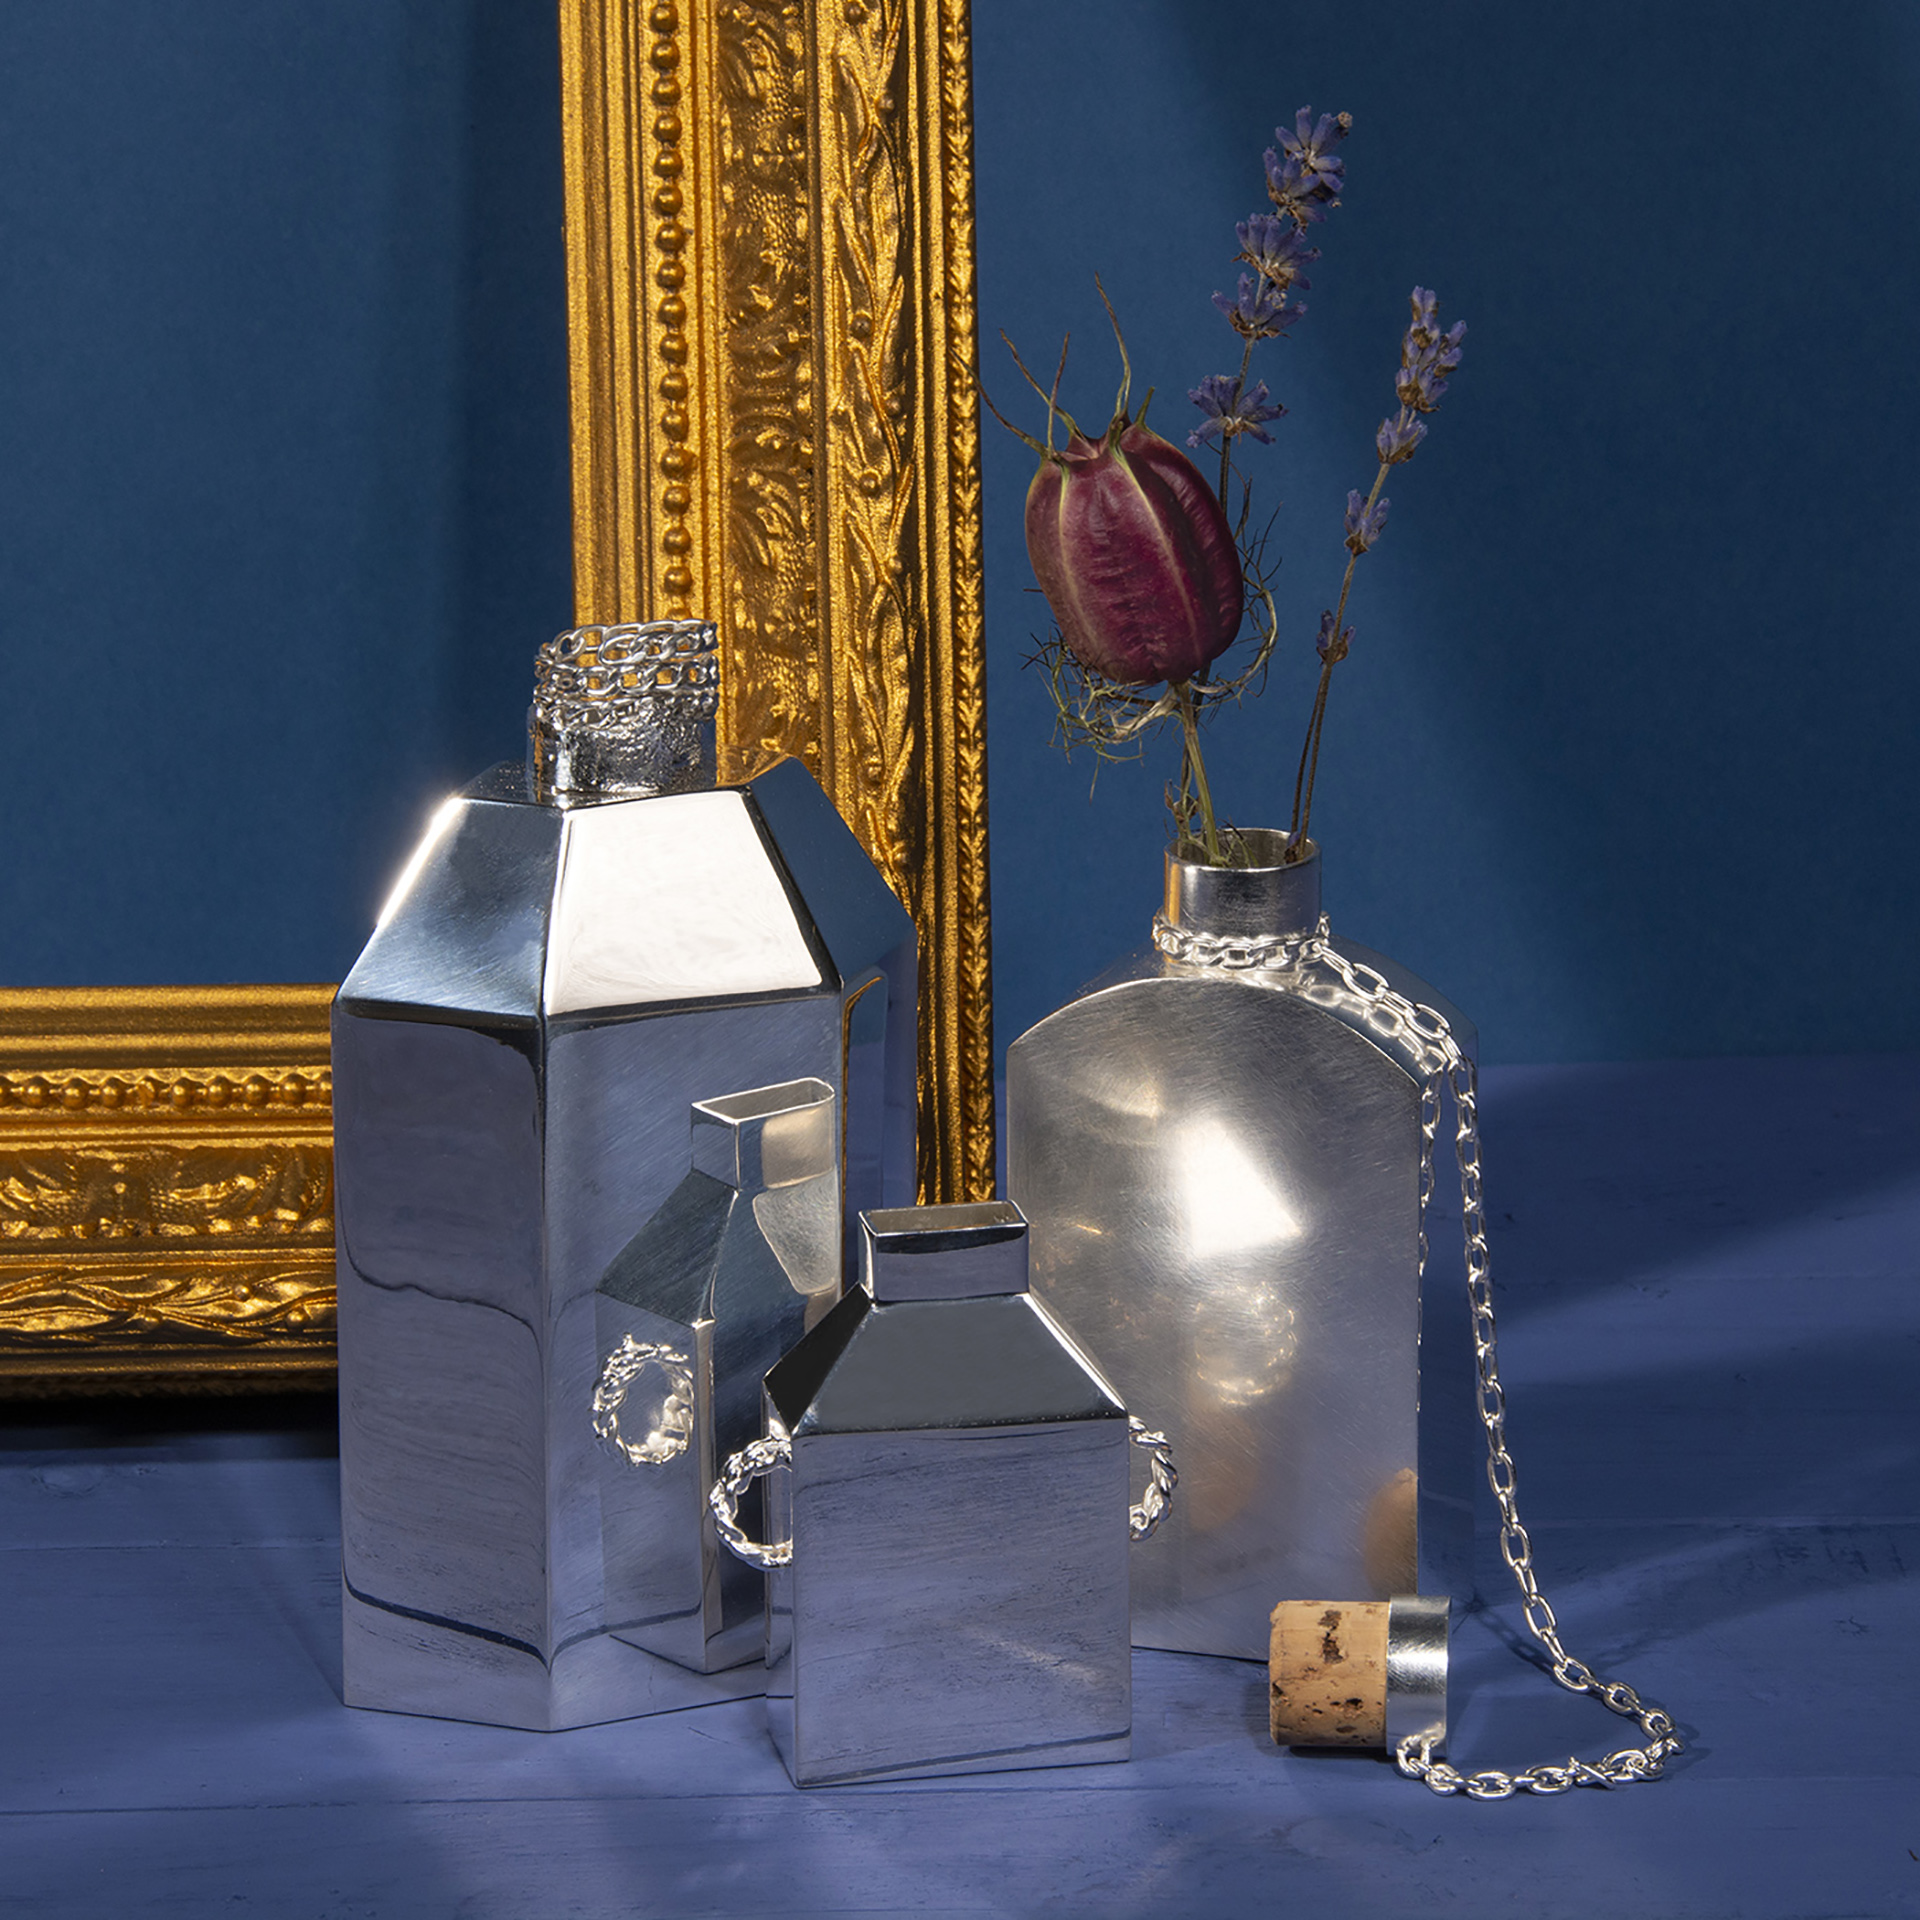 Three metal vases sitting next to a golden frame on a blue background. One of the vases is holding purple flowers. 